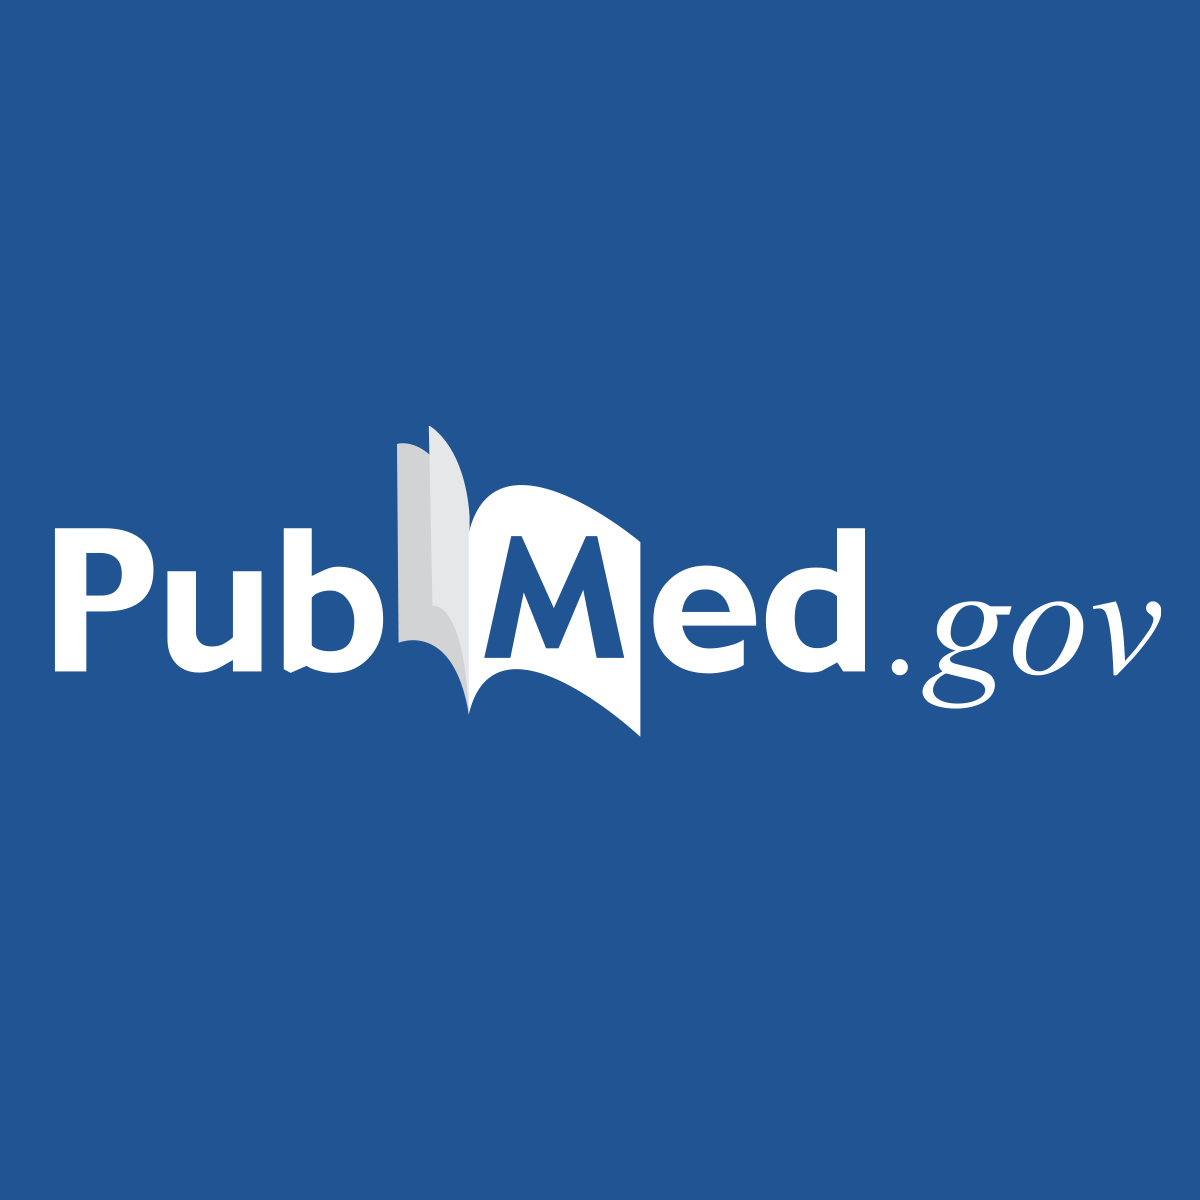 Relationship between protein biomarkers of chemotherapy response and microsatellite status, tumor mutational burden and PD-L1 expression in cancer patients - PubMed